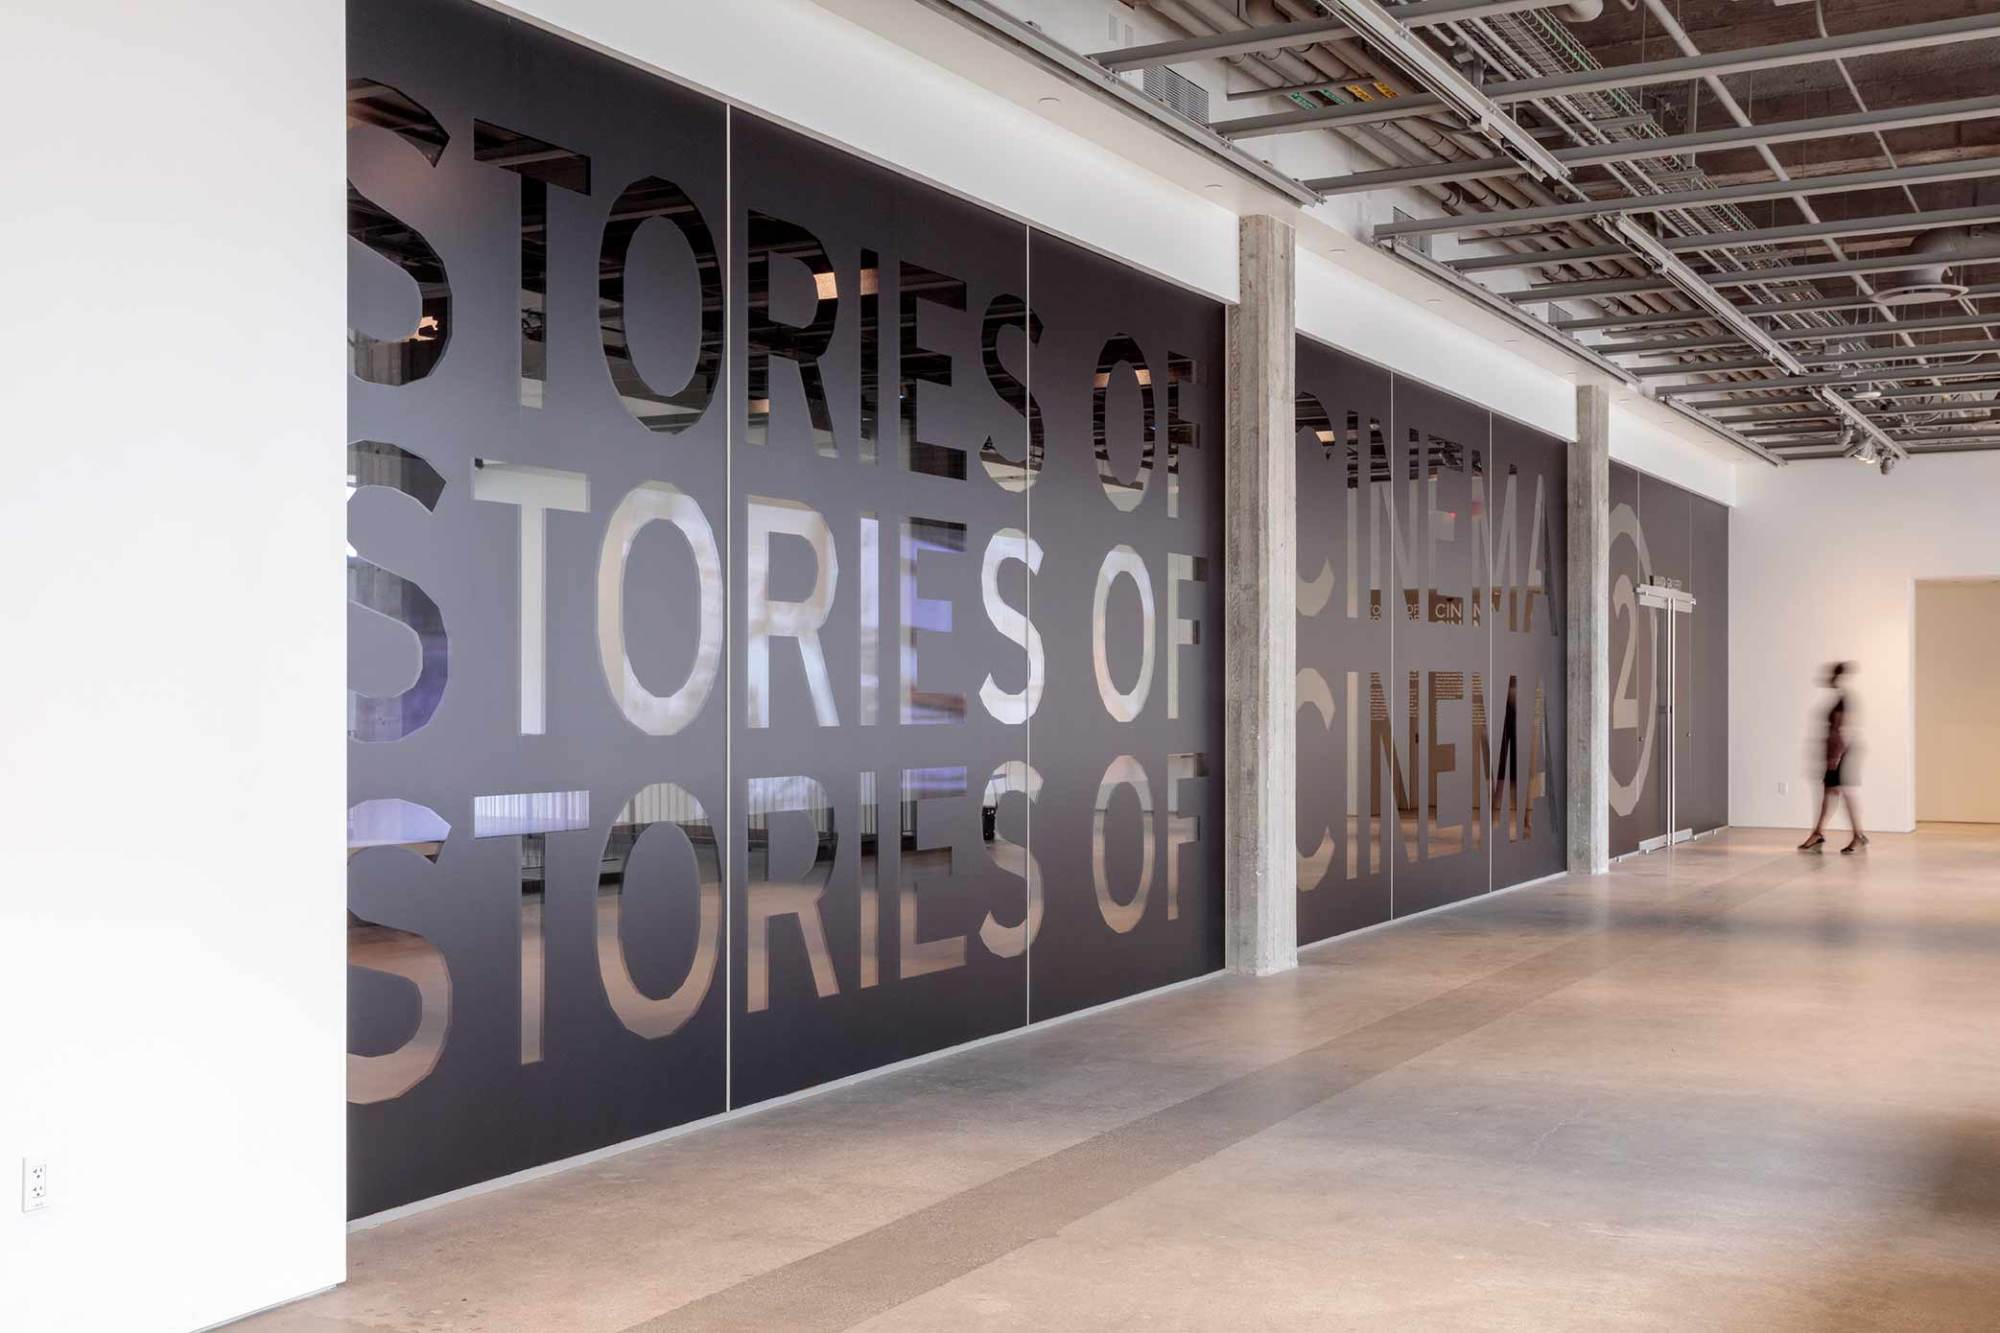 Title wall, Stories of Cinema 2, Academy Museum of Motion Pictures. Photo by Joshua White, JWPictures/© Academy Museum Foundation
